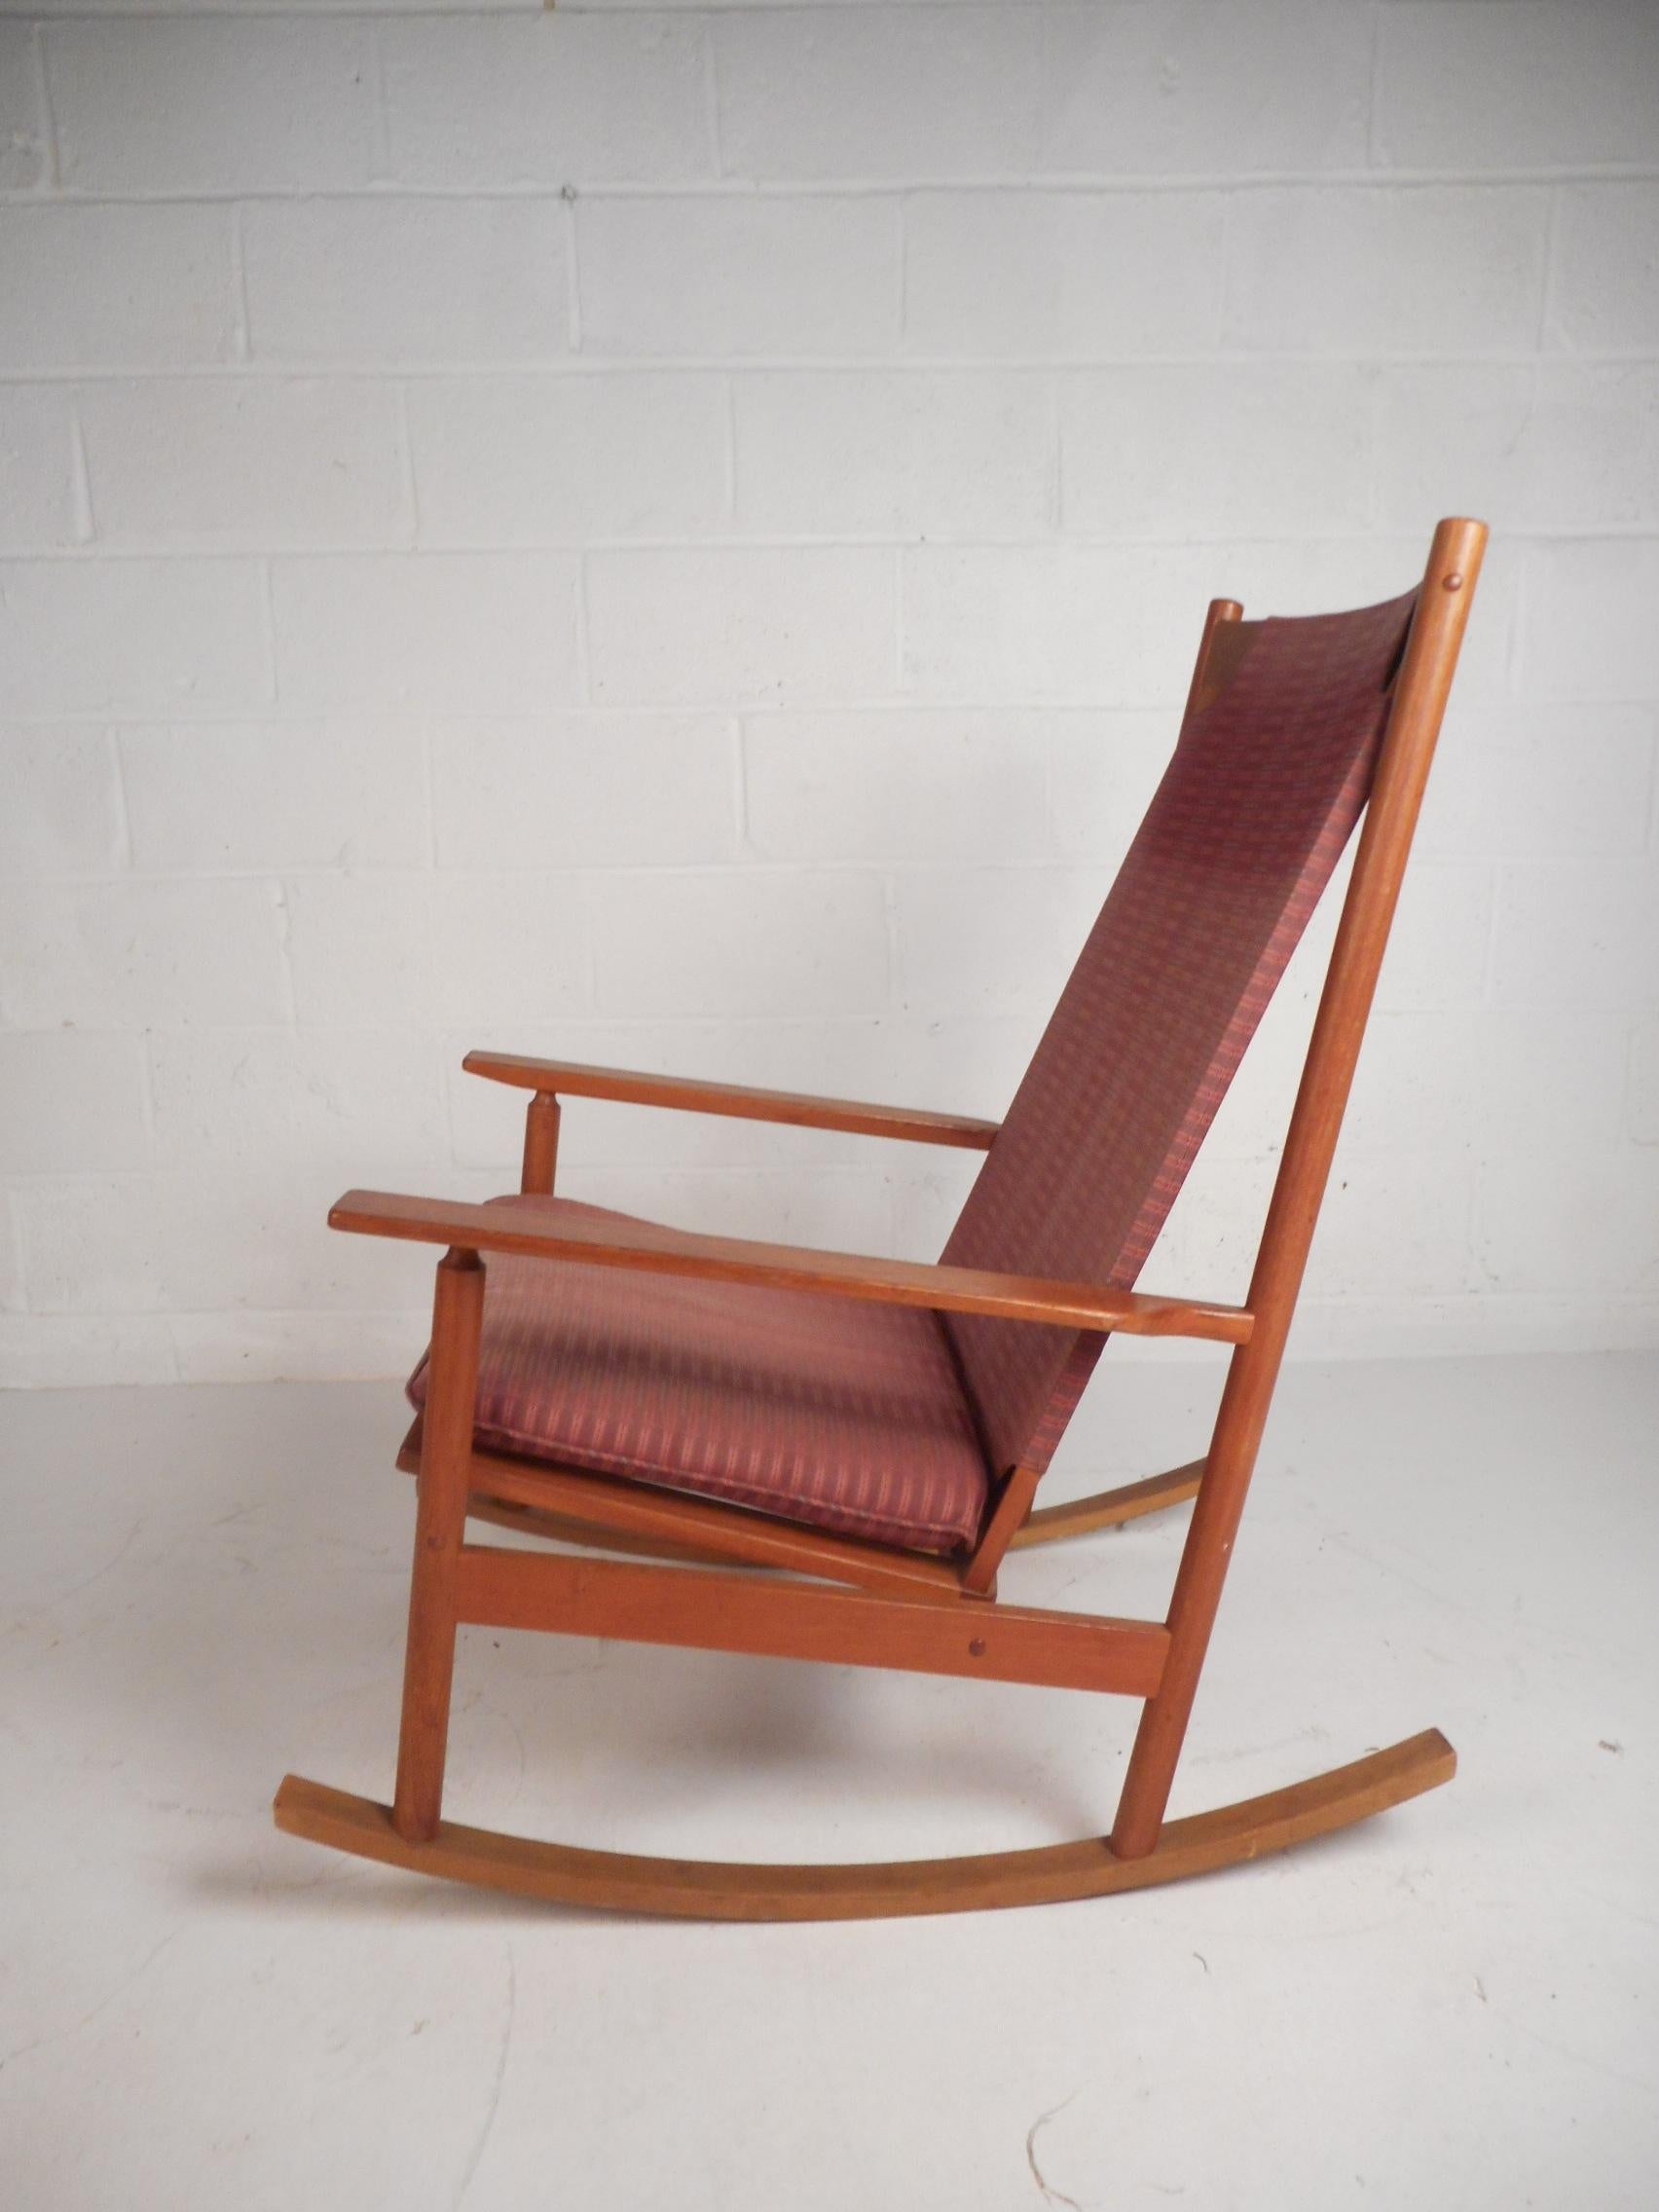 This beautiful vintage modern rocking chair features a sculpted teak frame and a thick seat cushion. The spring seat supports under the cushion allow for maximum comfort during long periods. A stylish chair with an angled back rest and low arm rests